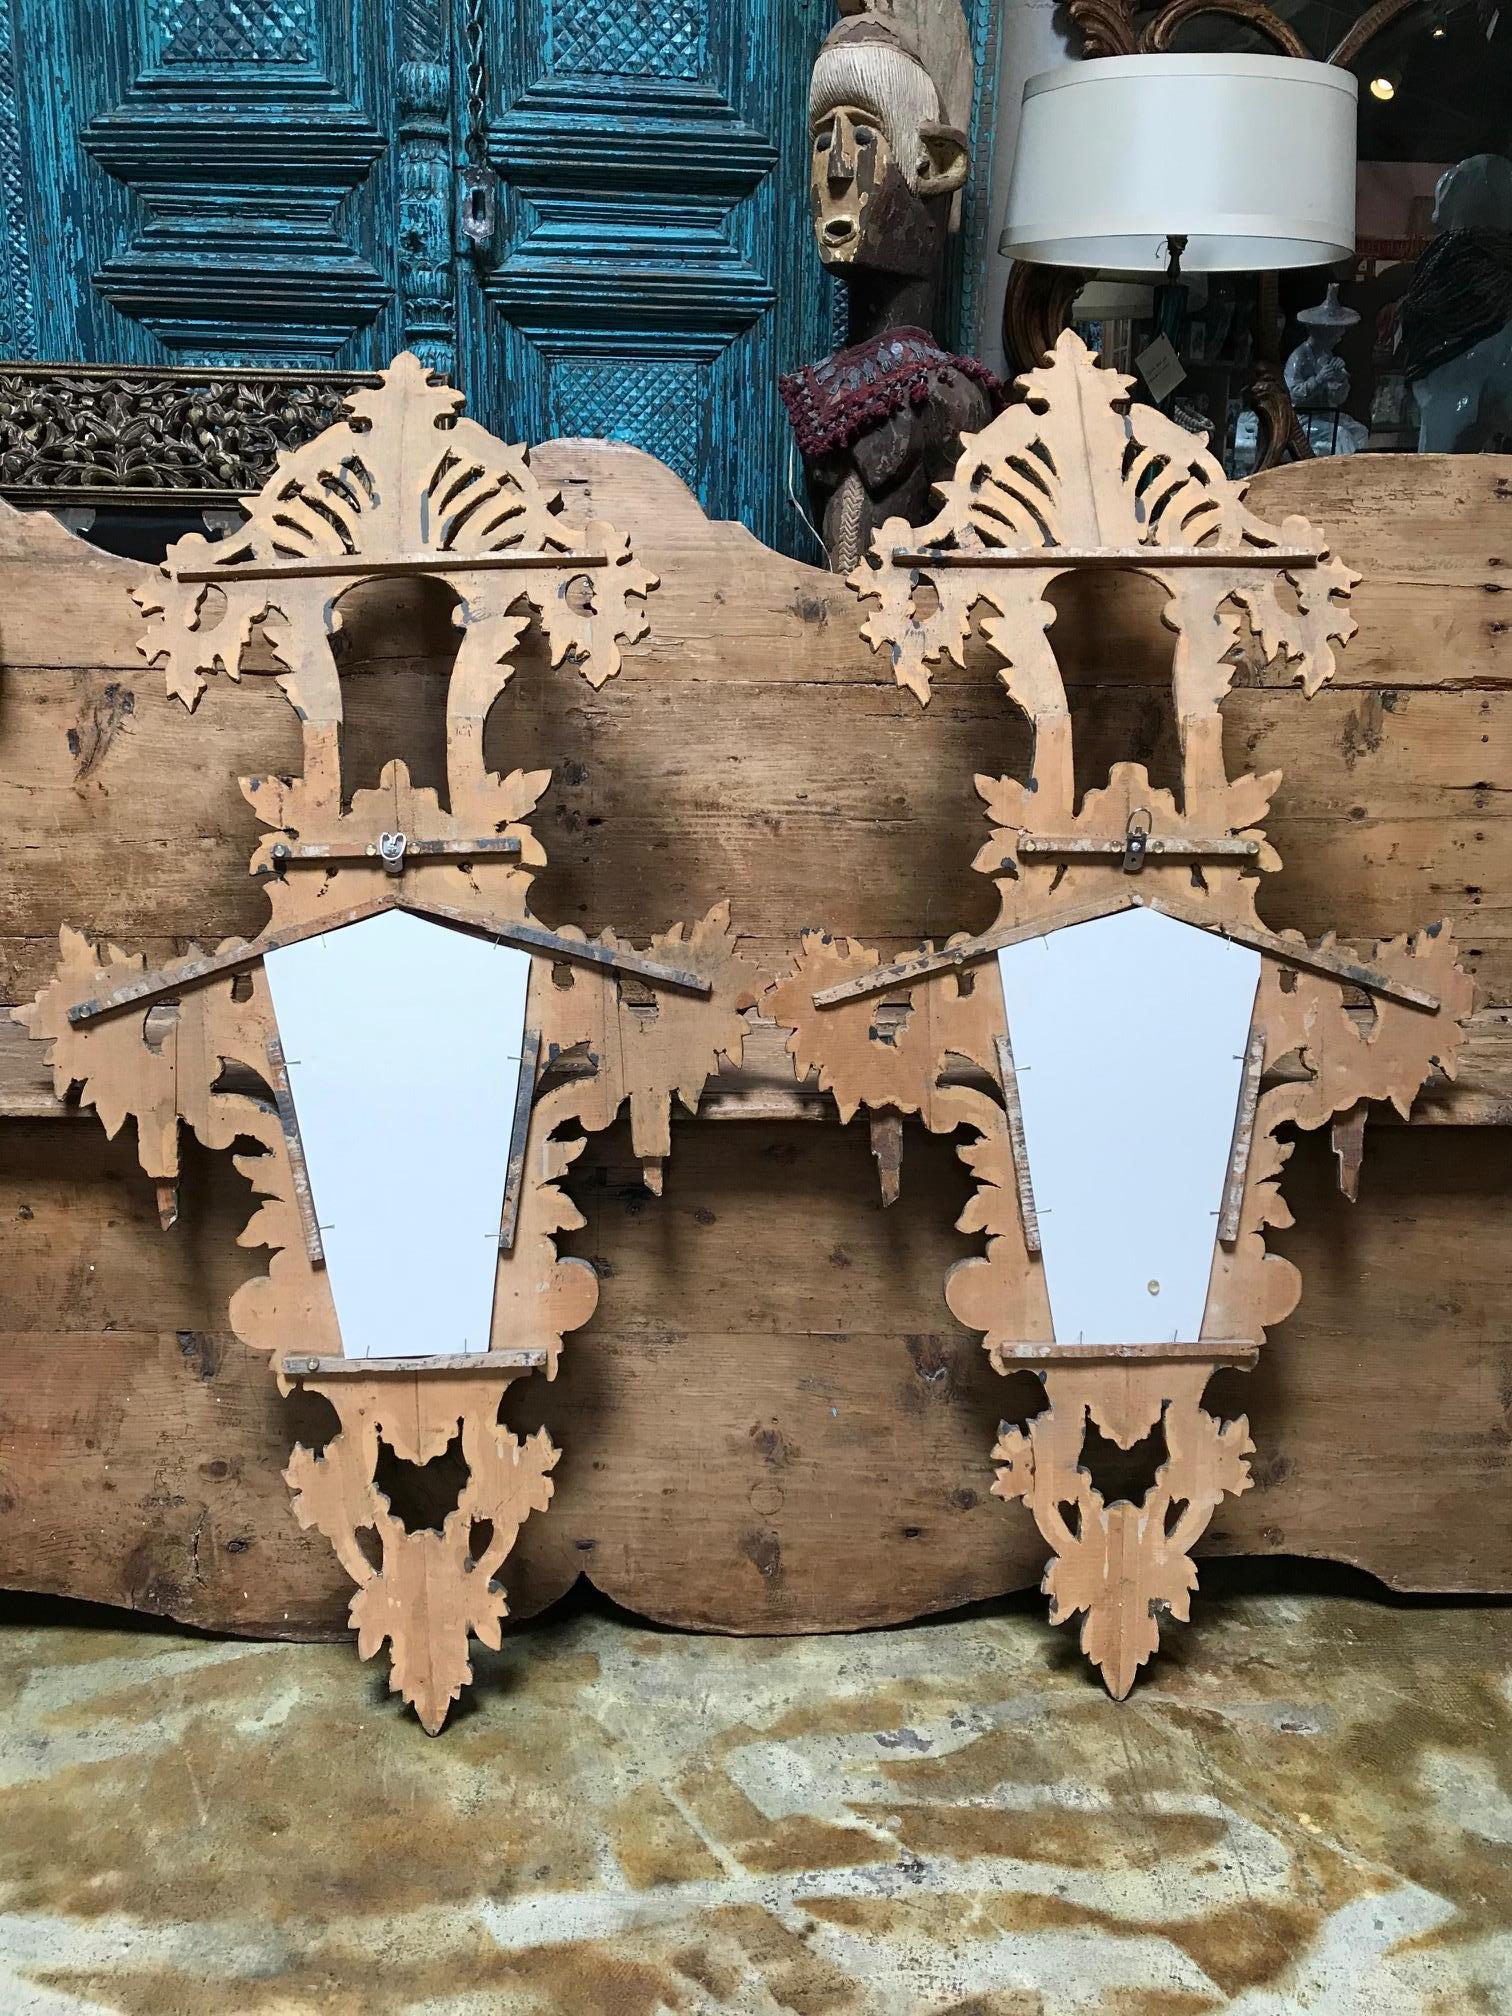 These intricate, ornately carved pieces are both beautiful and attention grabbing. Bathed in gold leaf, they add a Classic, royal-like feel to any space.